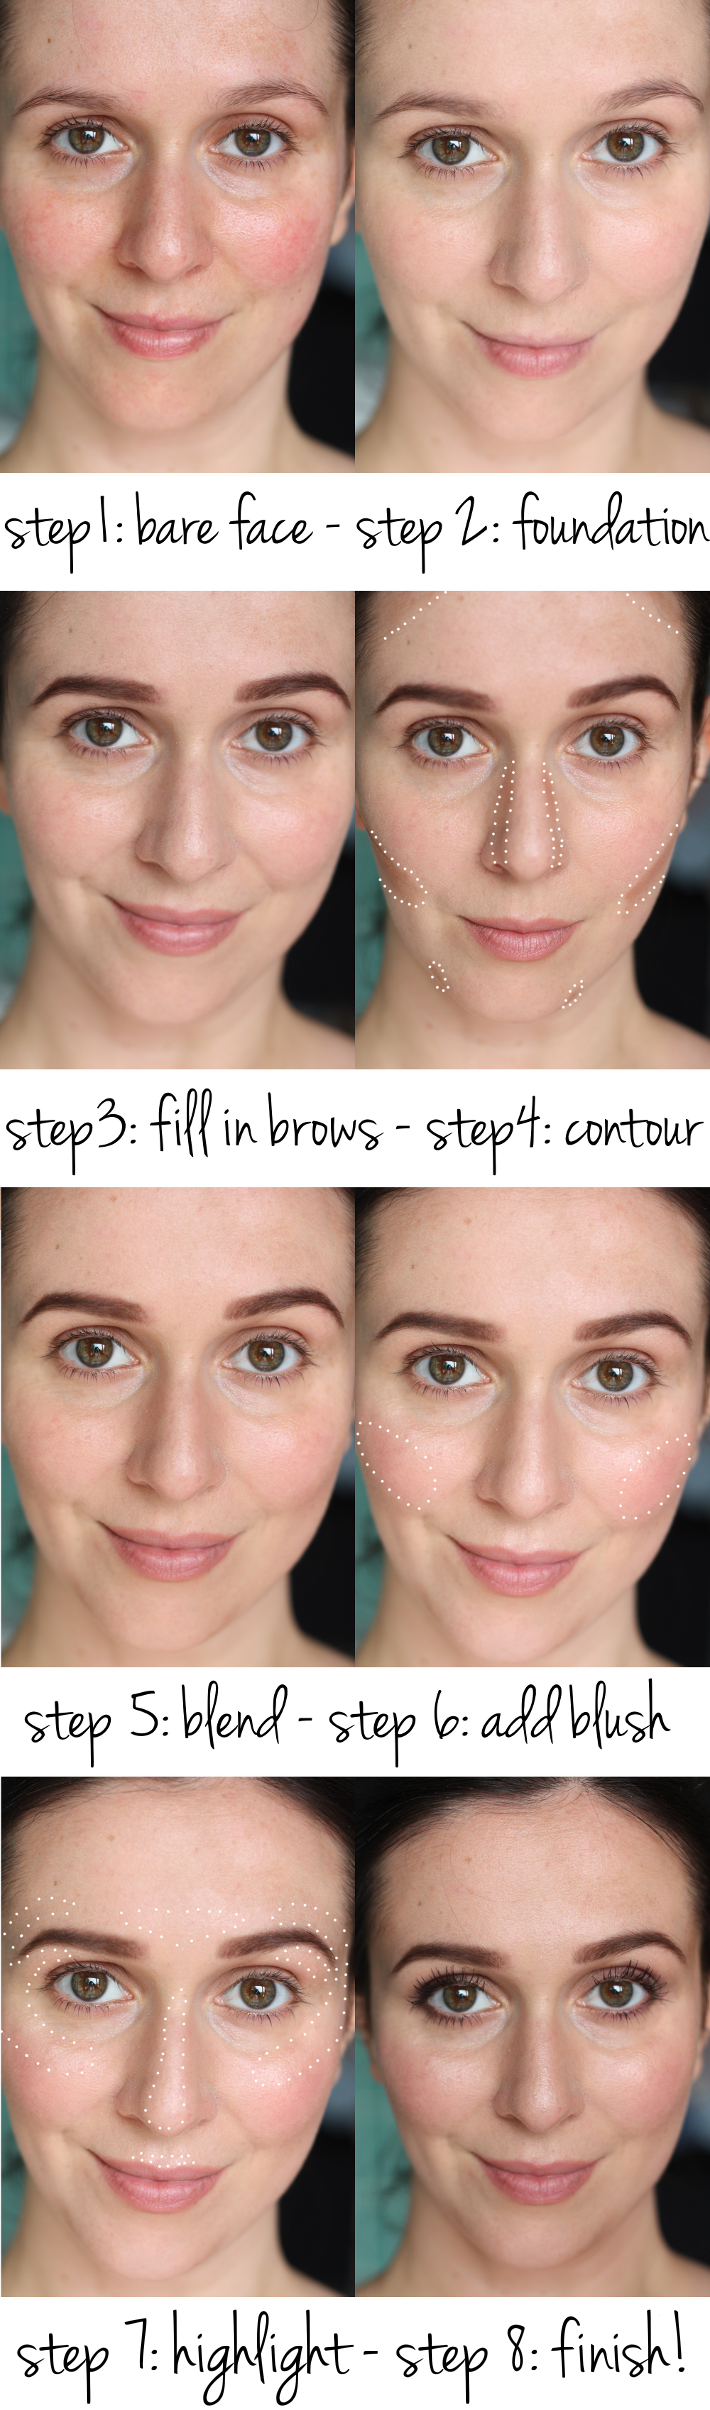 Review and Tutorial: Contouring for Beginners with Sleek Face Form in Light - THE STYLING DUTCHMAN.